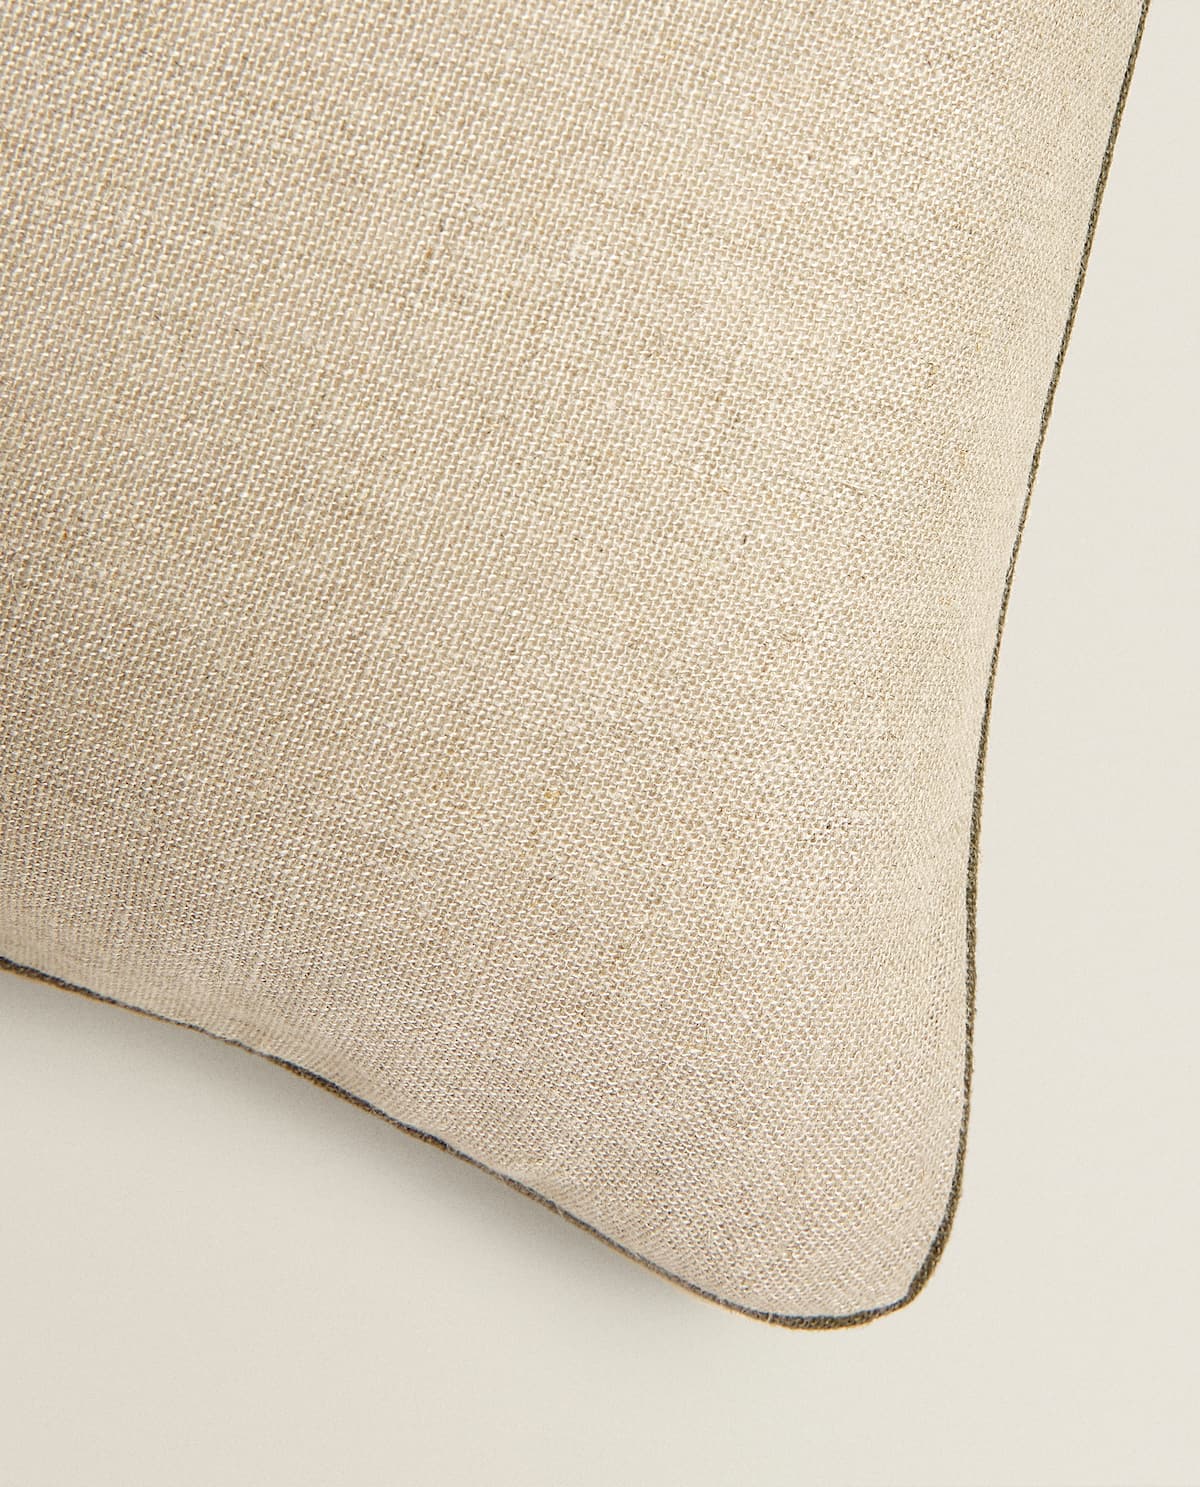 Washed-linen-throw-pillow-from-Zara-Home